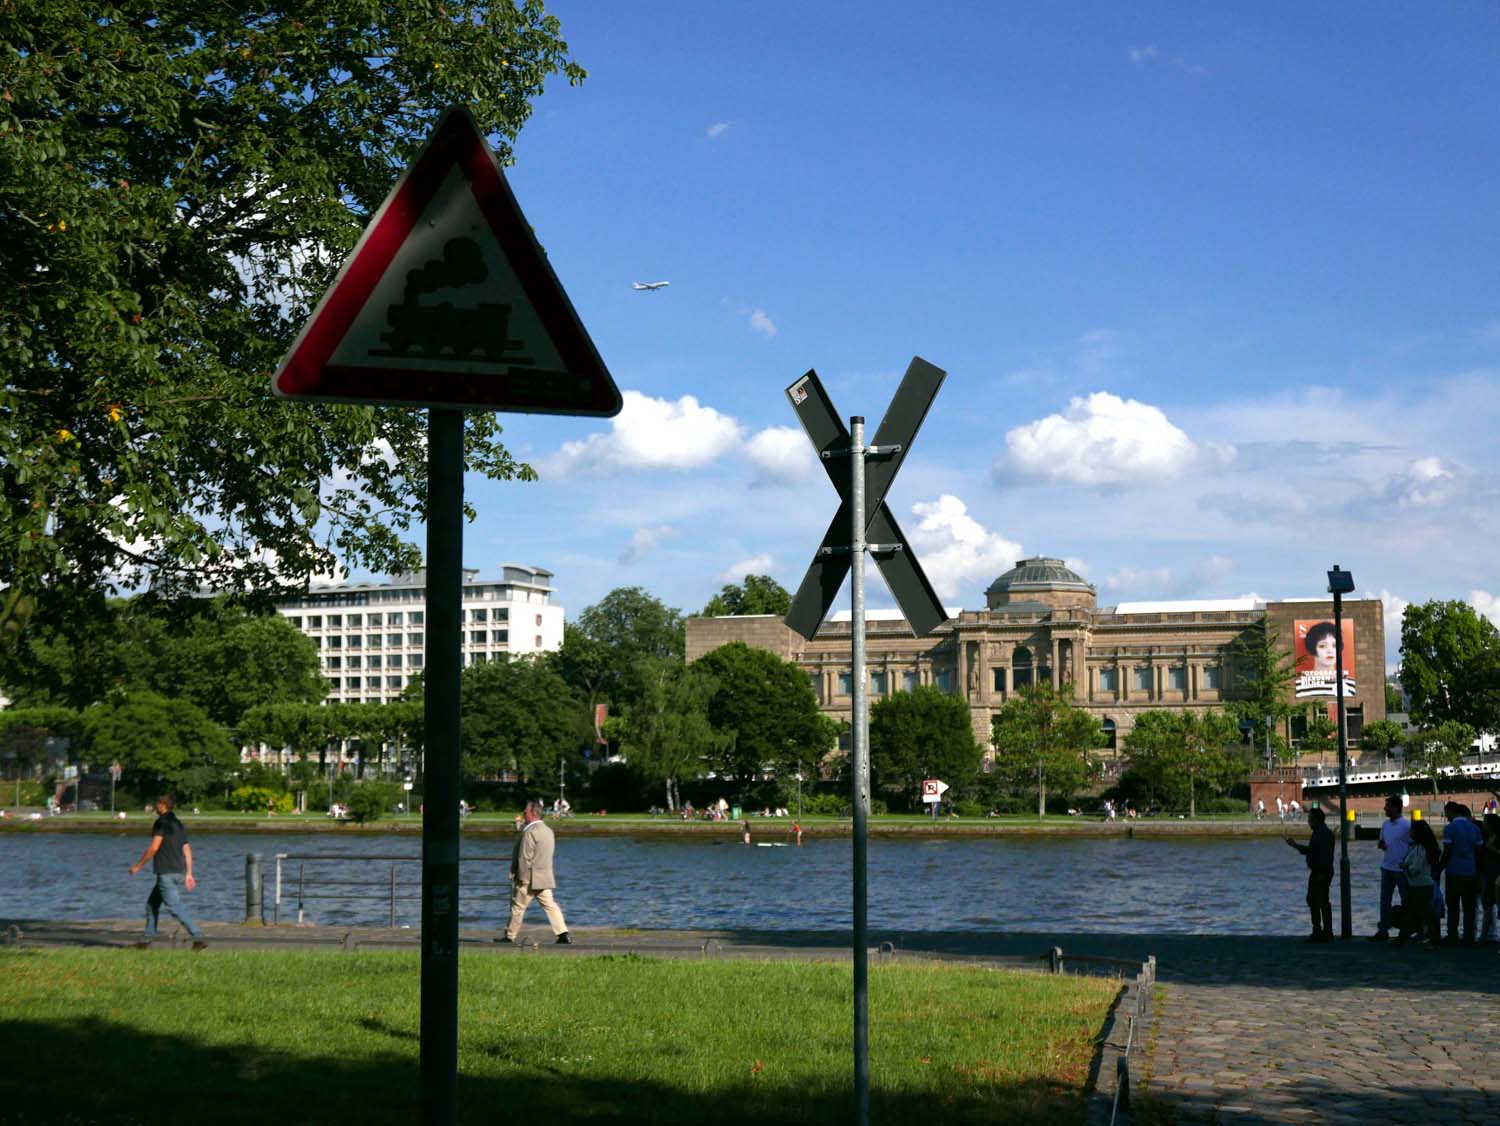 The Städel Museum from across the Main river